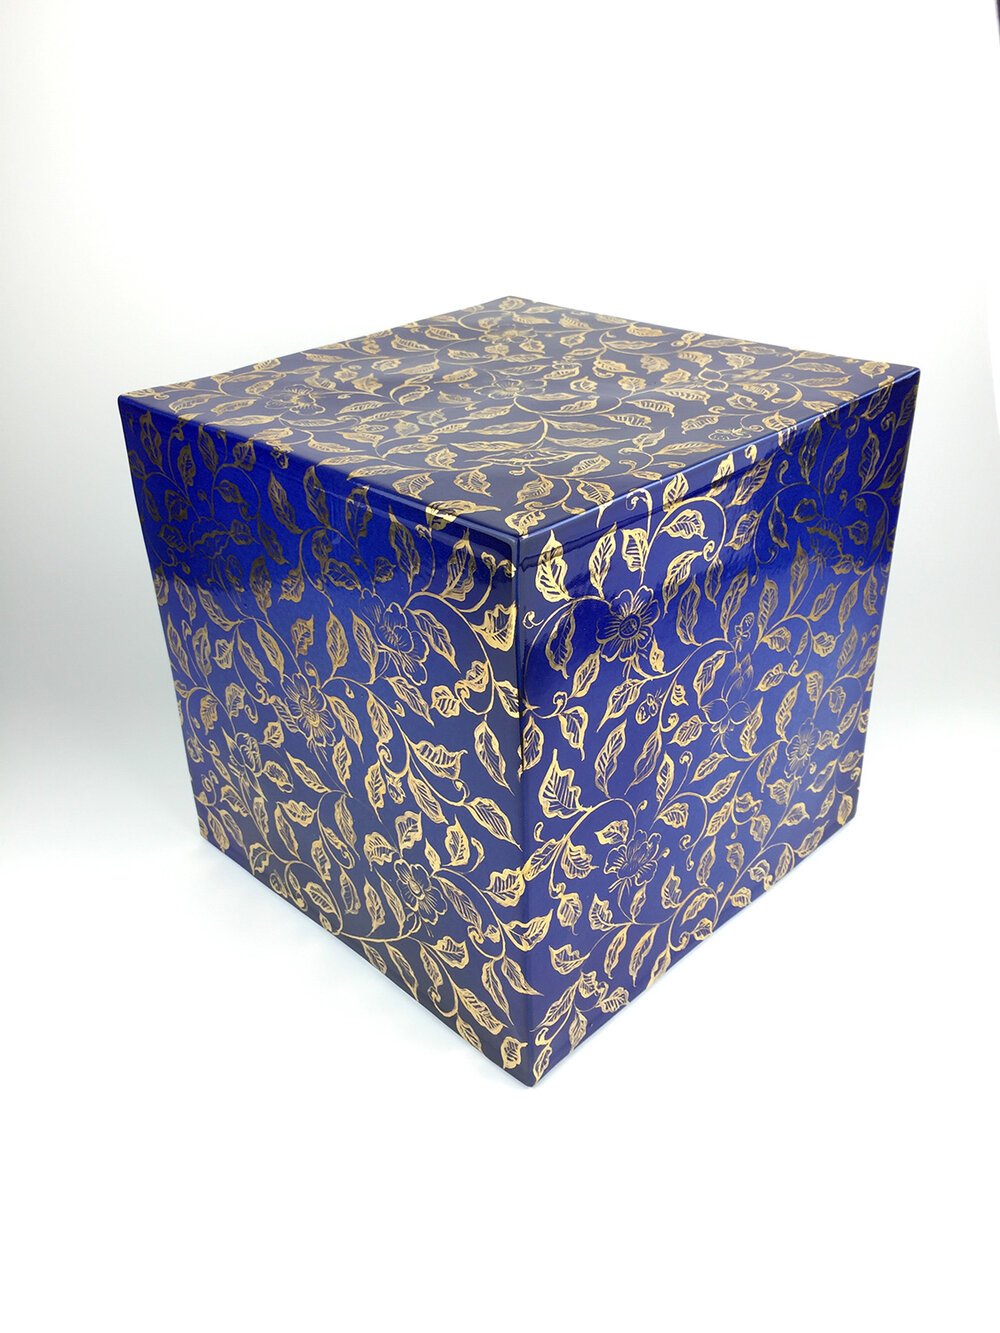 A-cube-with-gilded-intertwined-branches-and-flowers-on-a-blue-ground.jpg